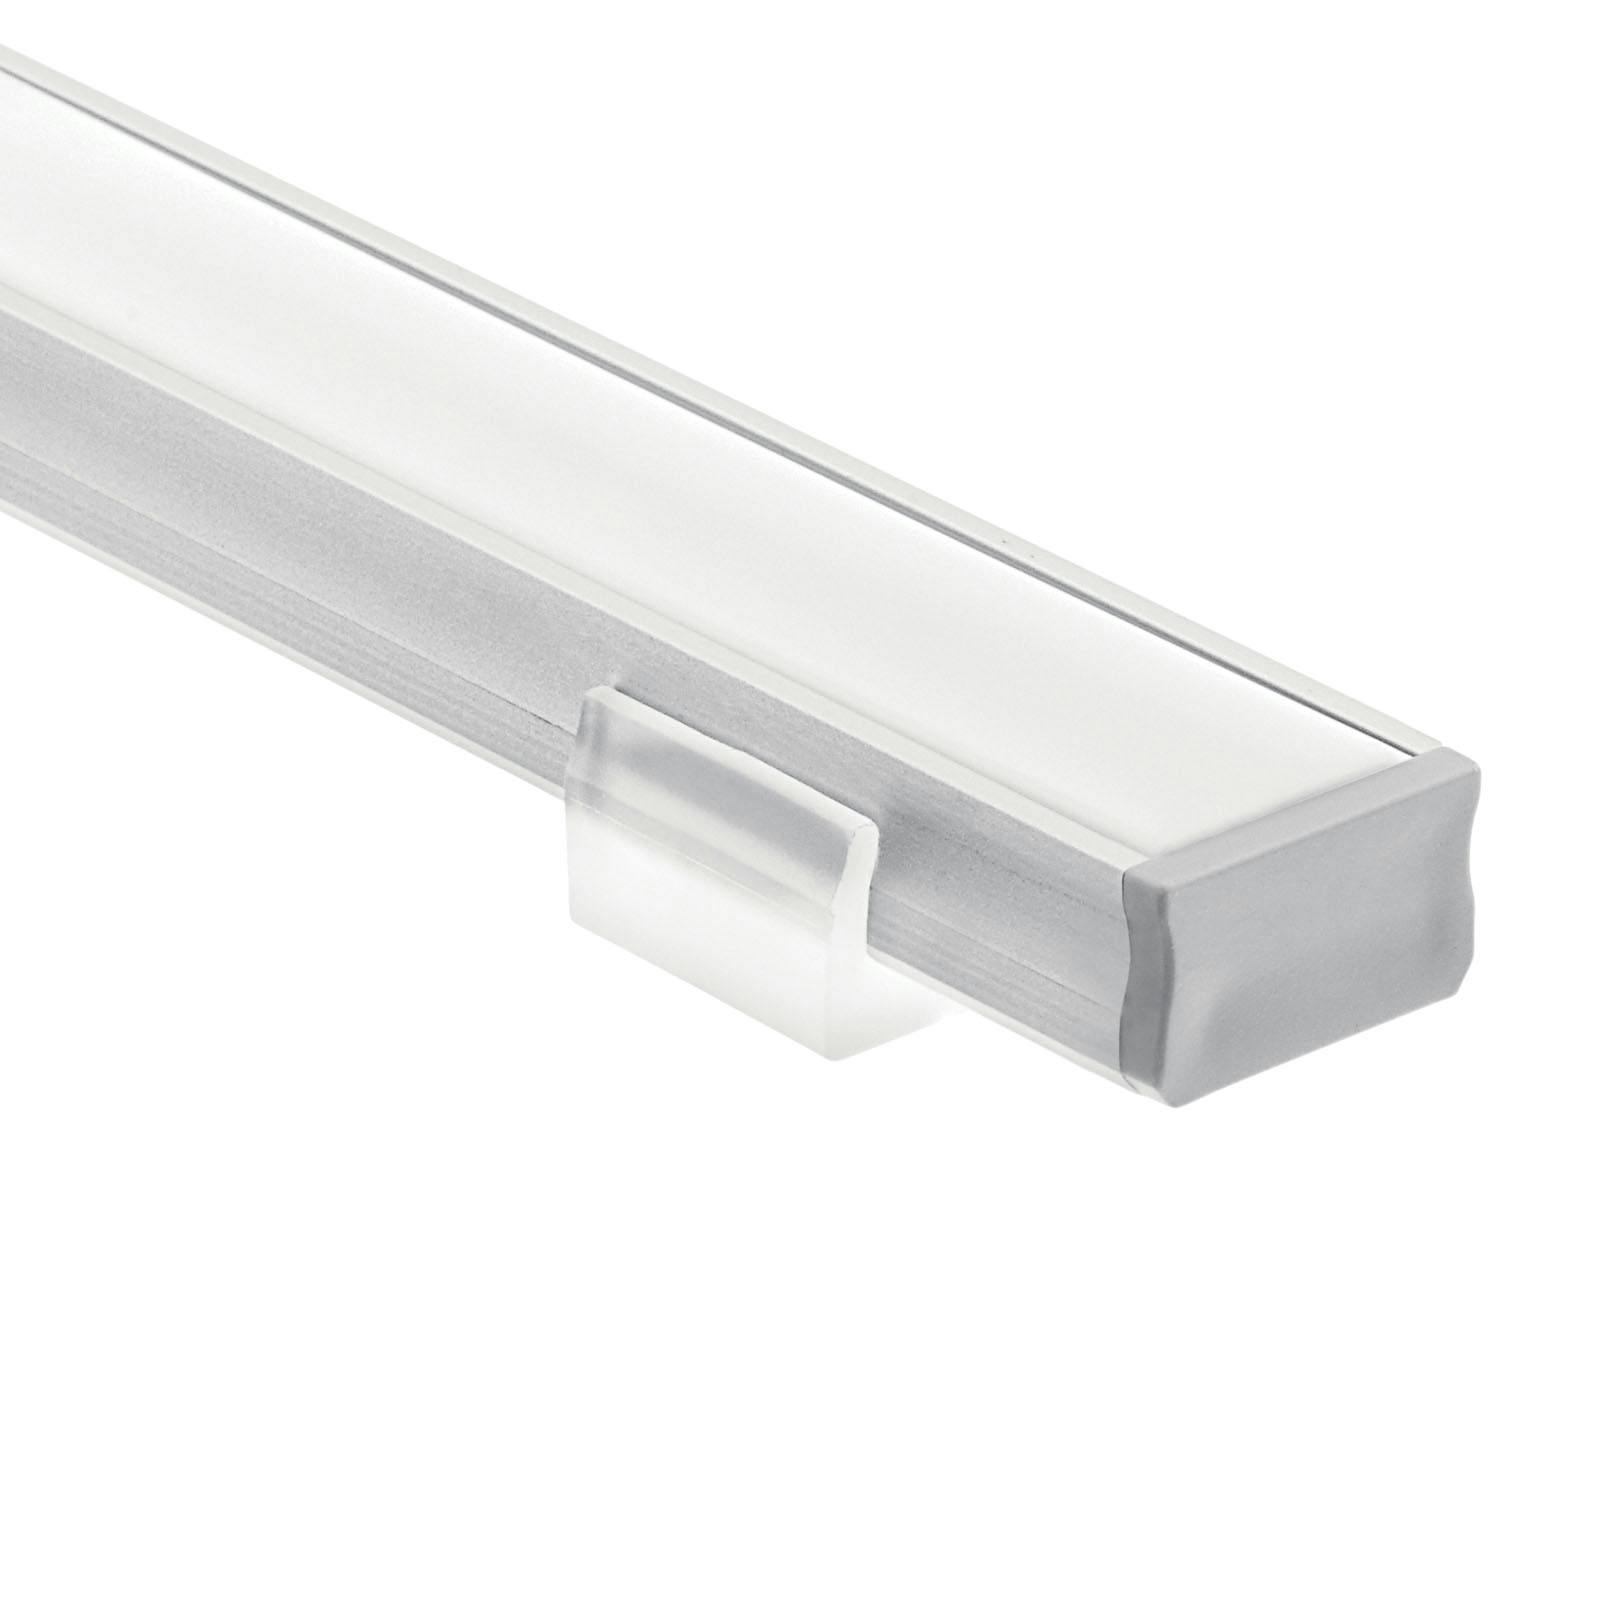 2' Standard Depth Surface Channel Silver on a white background